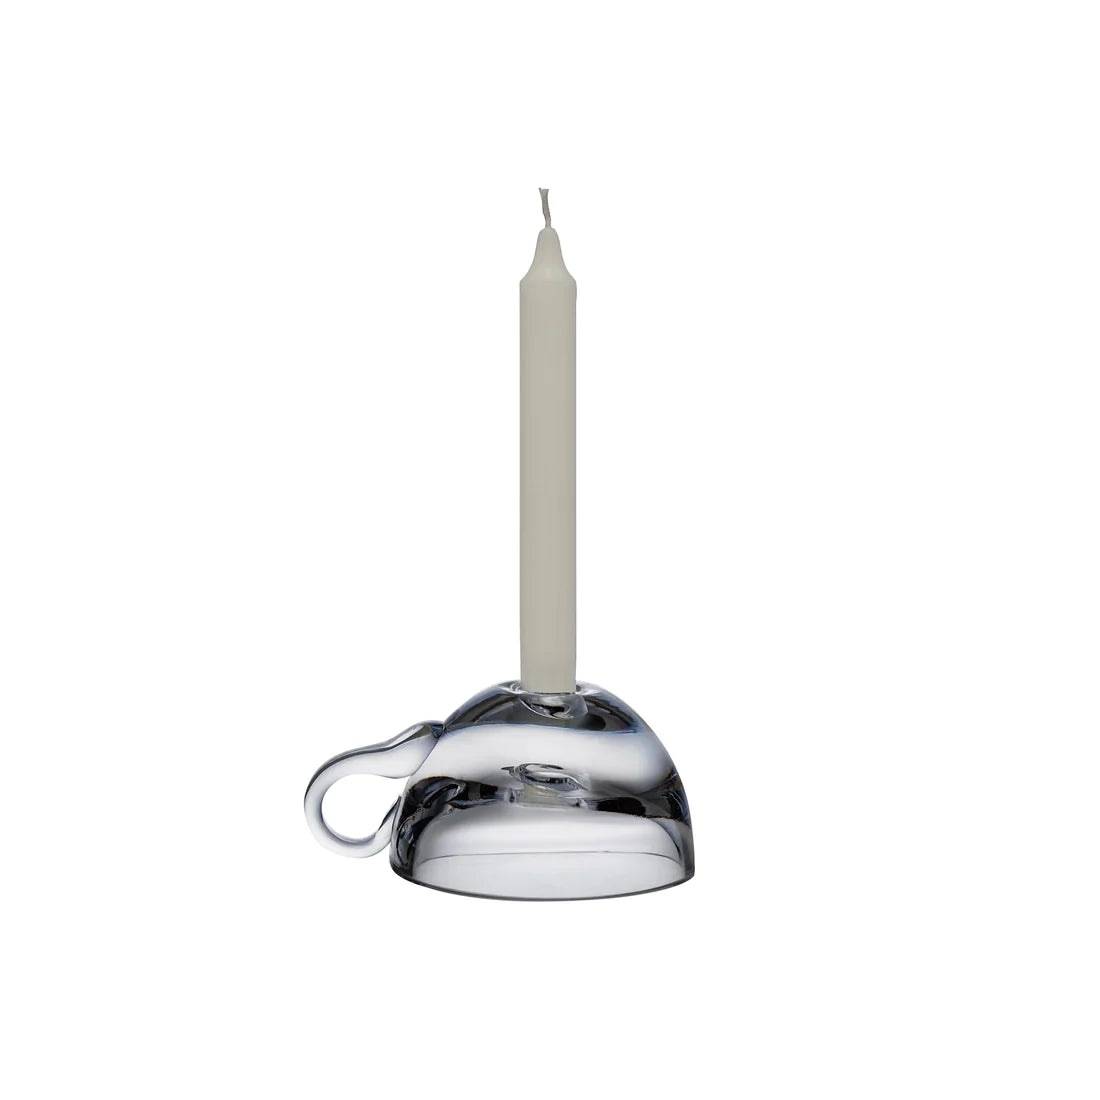 Cup Shaped Candle Holder - Qavunco